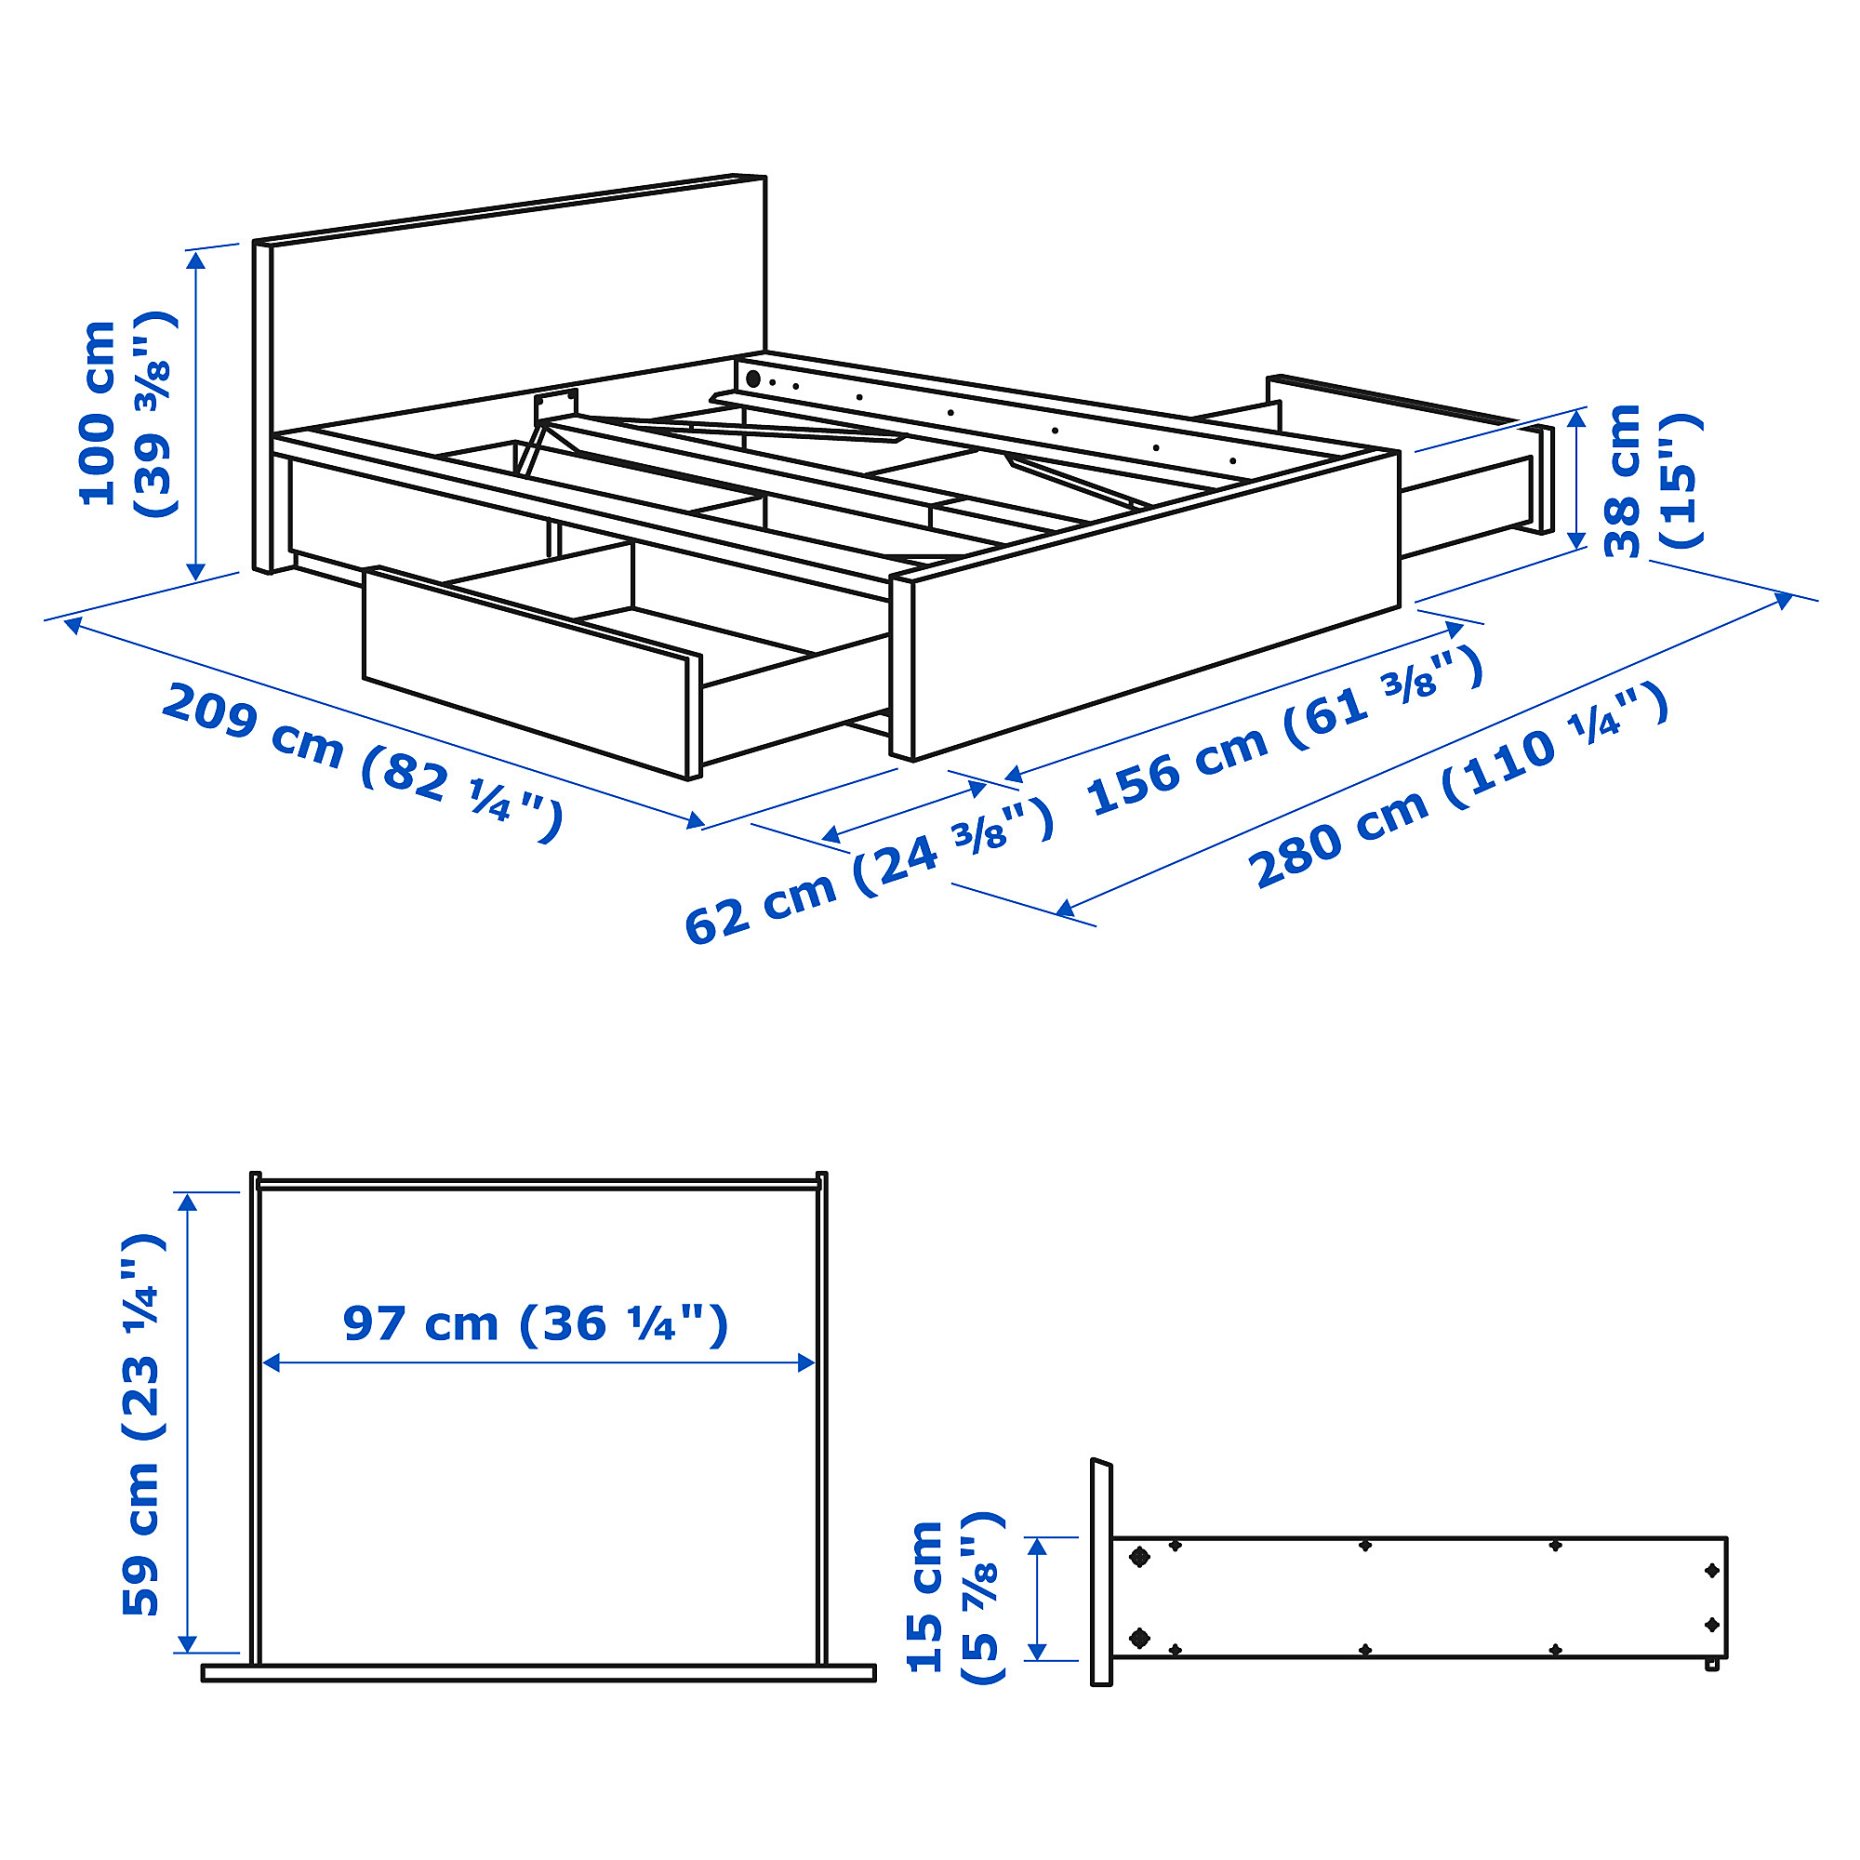 MALM, bed frame/high with 4 storage boxes, 140X200 cm, 990.199.15